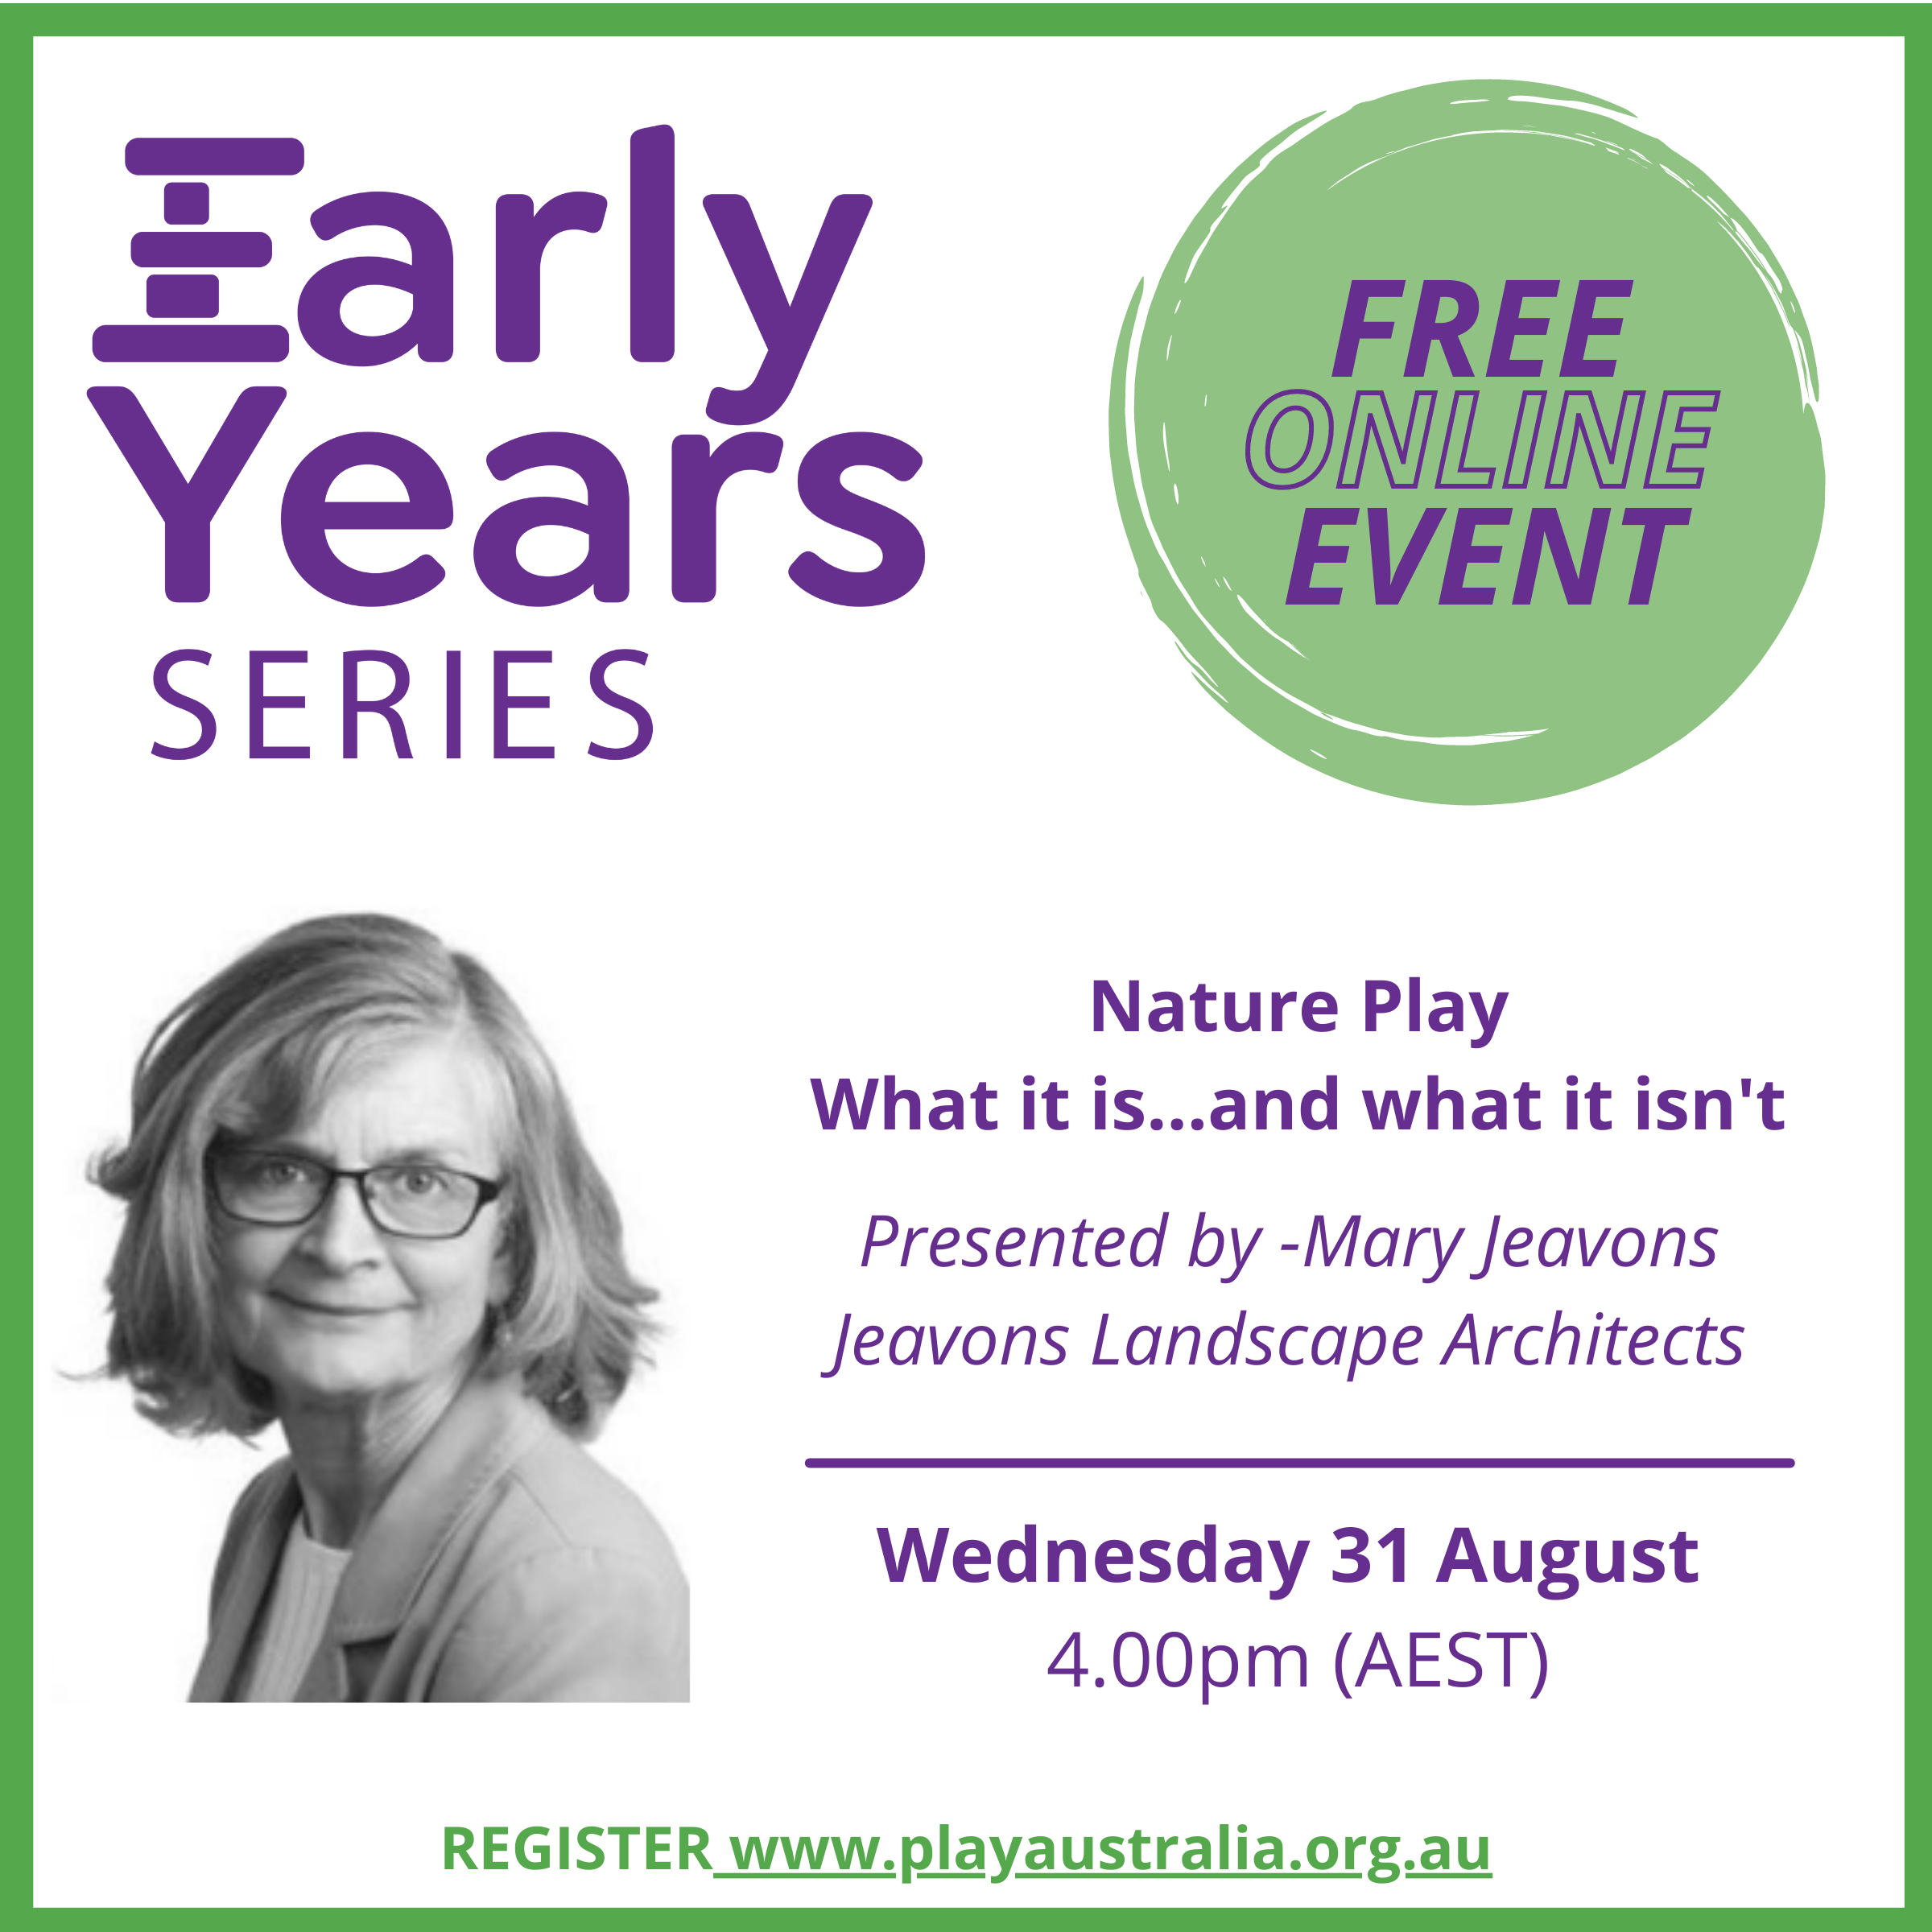 Early Years Series, Nature Play What it is and what it isn't with Mary Jeavons